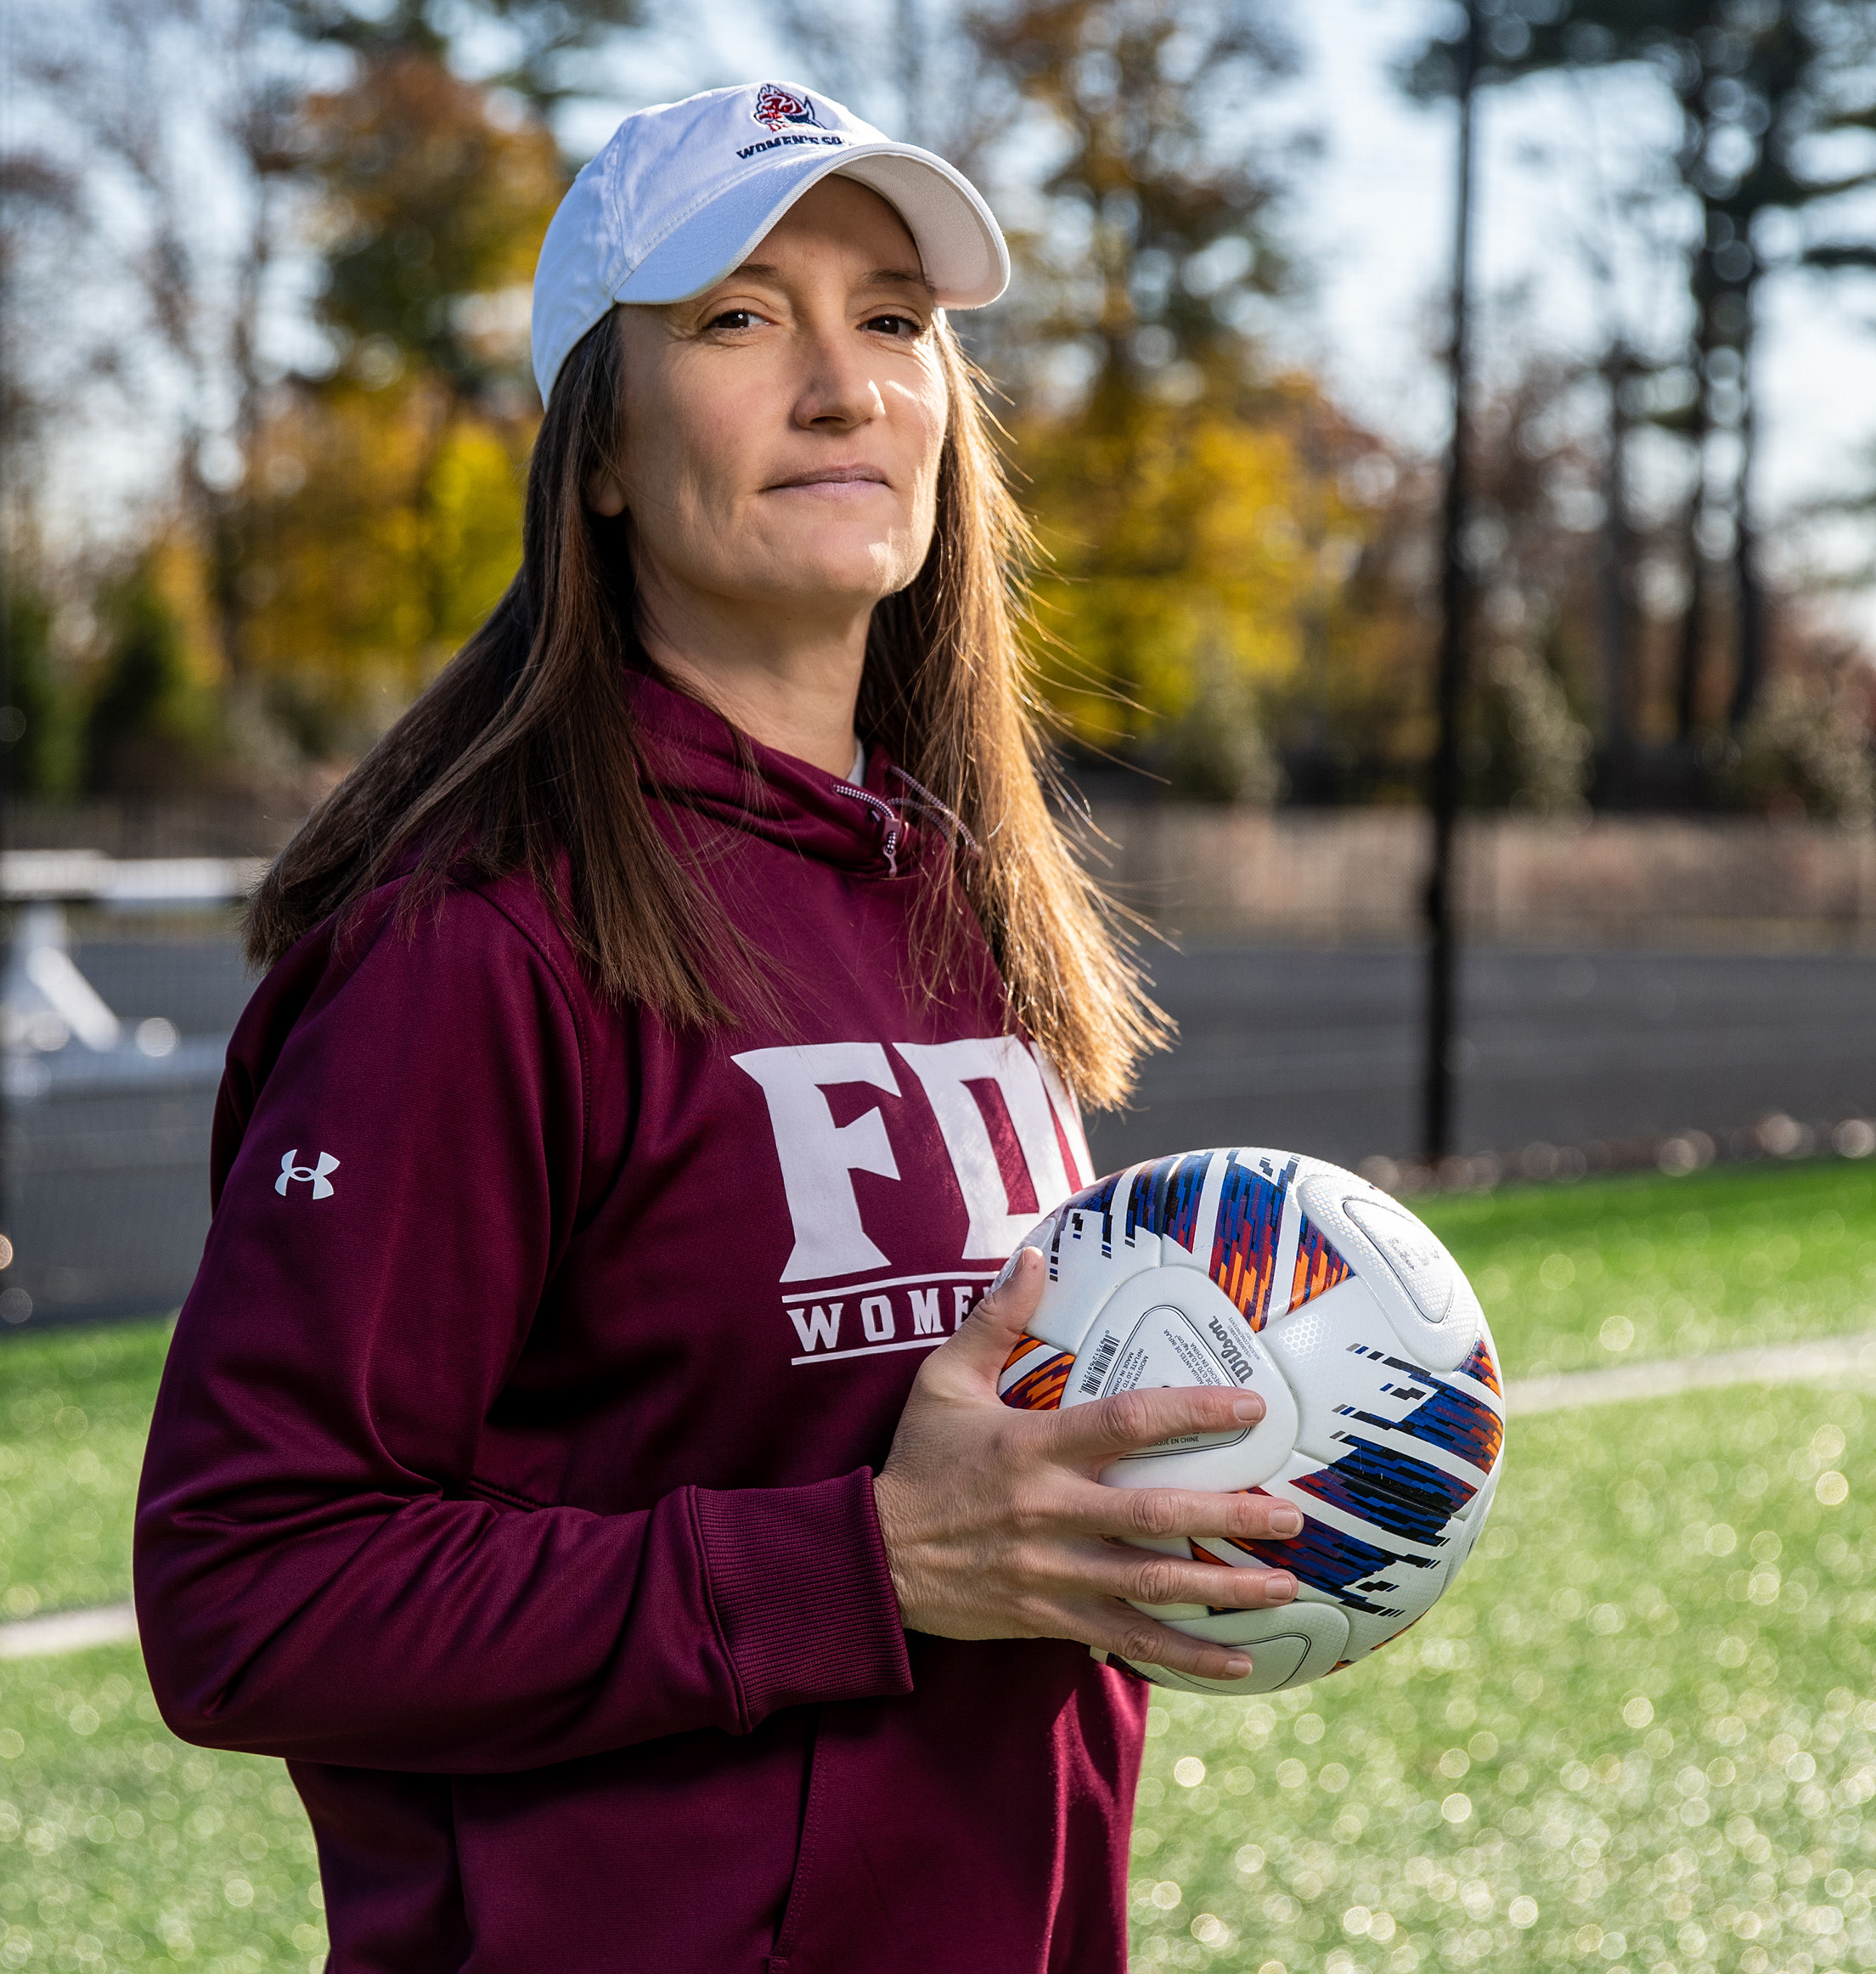 A woman in a white baseball cap and a burgundy shirt stands on a soccer field holding a soccer ball.